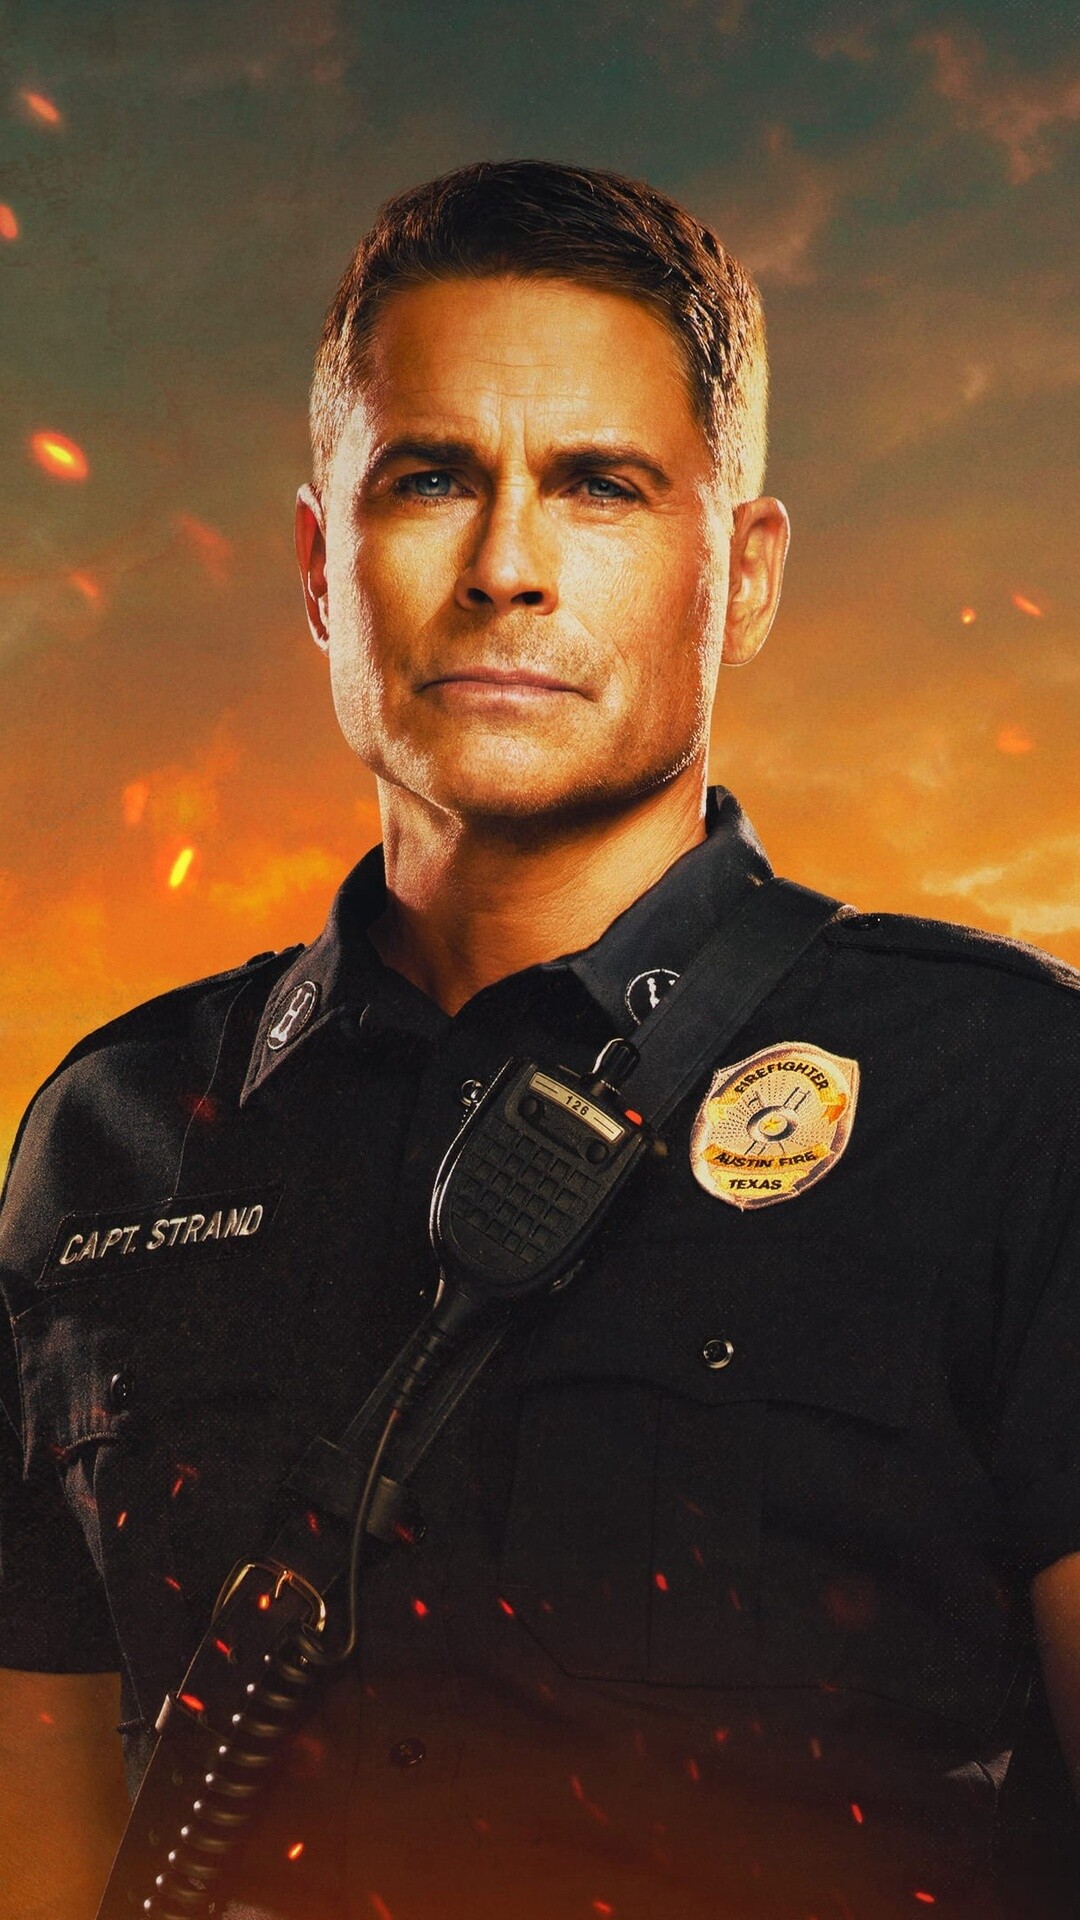 9-1-1: Lone Star (TV Series): Fireman, Captain, Robert Hepler Lowe, Widely Known For His Role As Sam Seaborn On The NBC Political Drama "The West Wing". 1080x1920 Full HD Background.